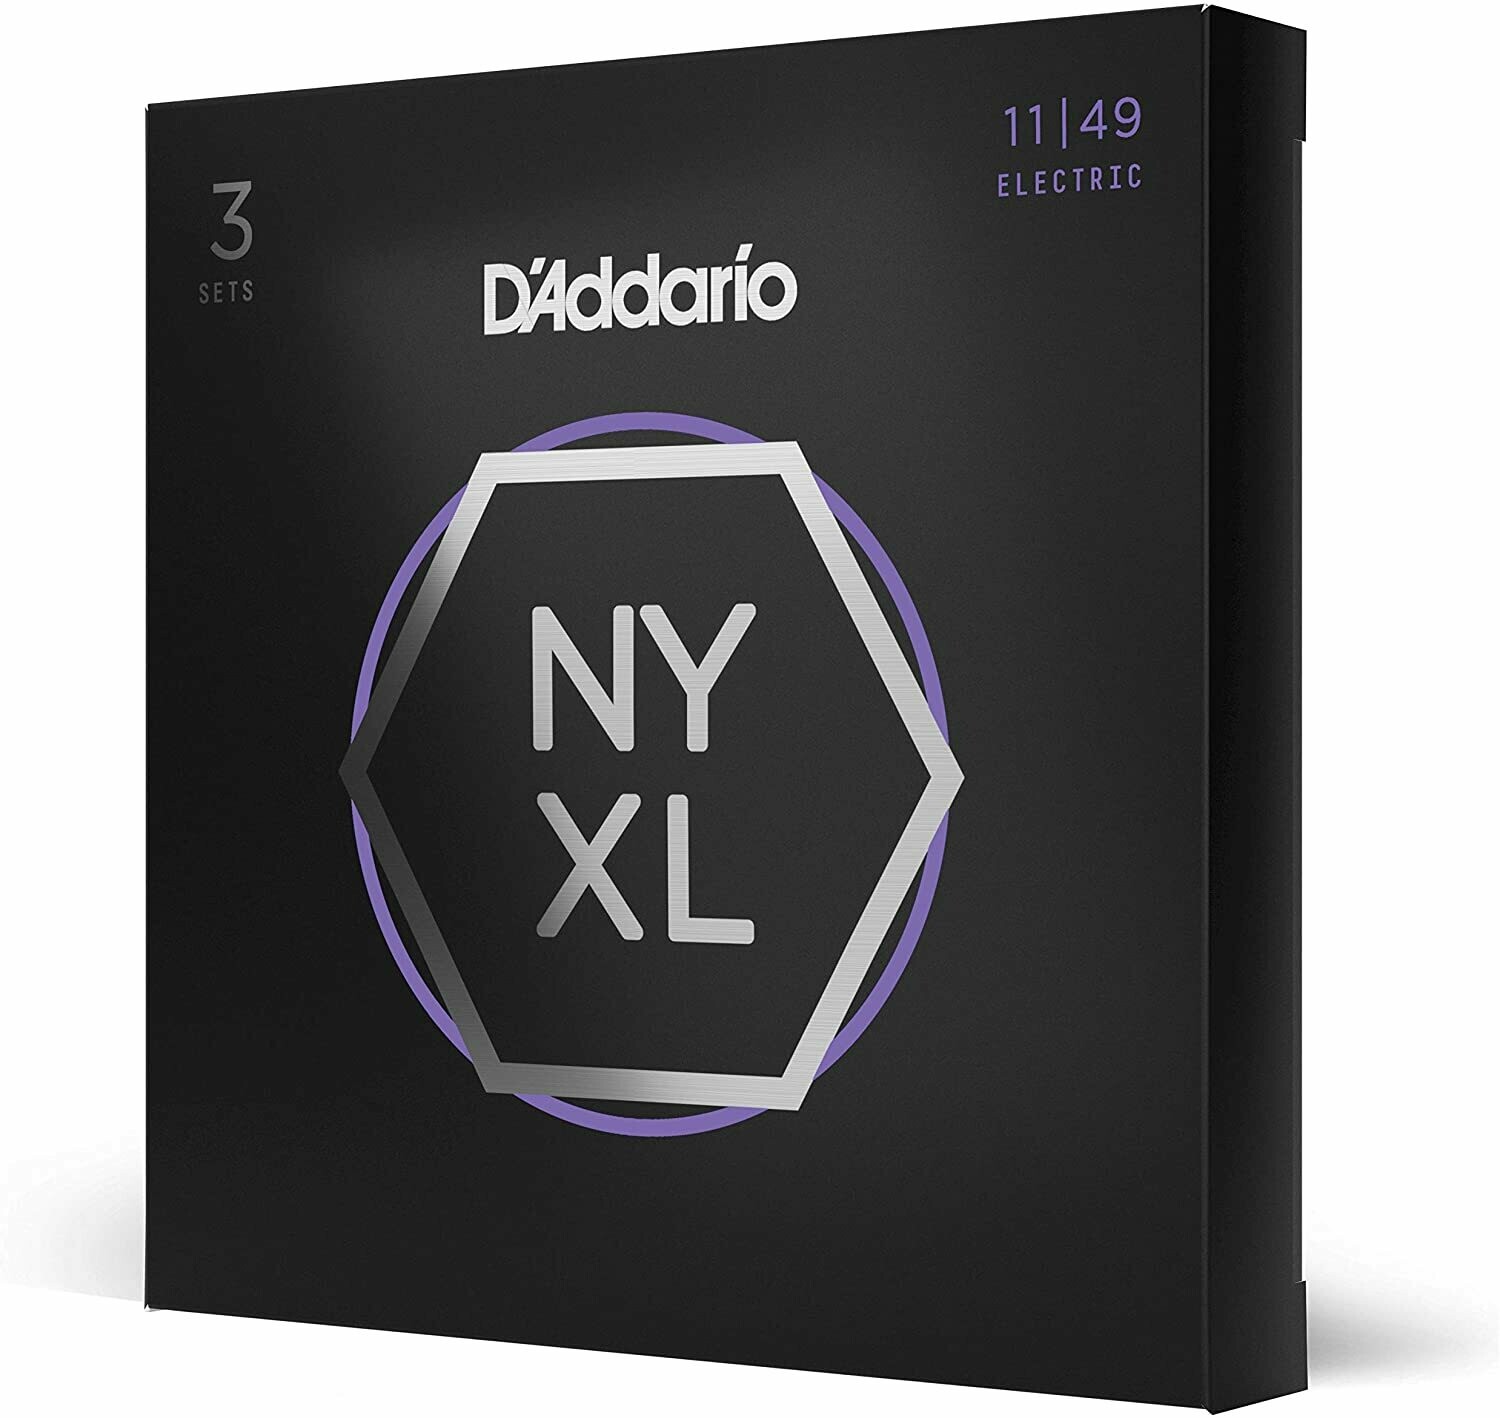 D’Addario NYXL1149-3P Nickel Plated Electric Guitar Strings, Medium,11-49 (3 Sets) – High Carbon Steel Alloy for Unprecedented Strength – Ideal Combination of Playability and Electric Tone